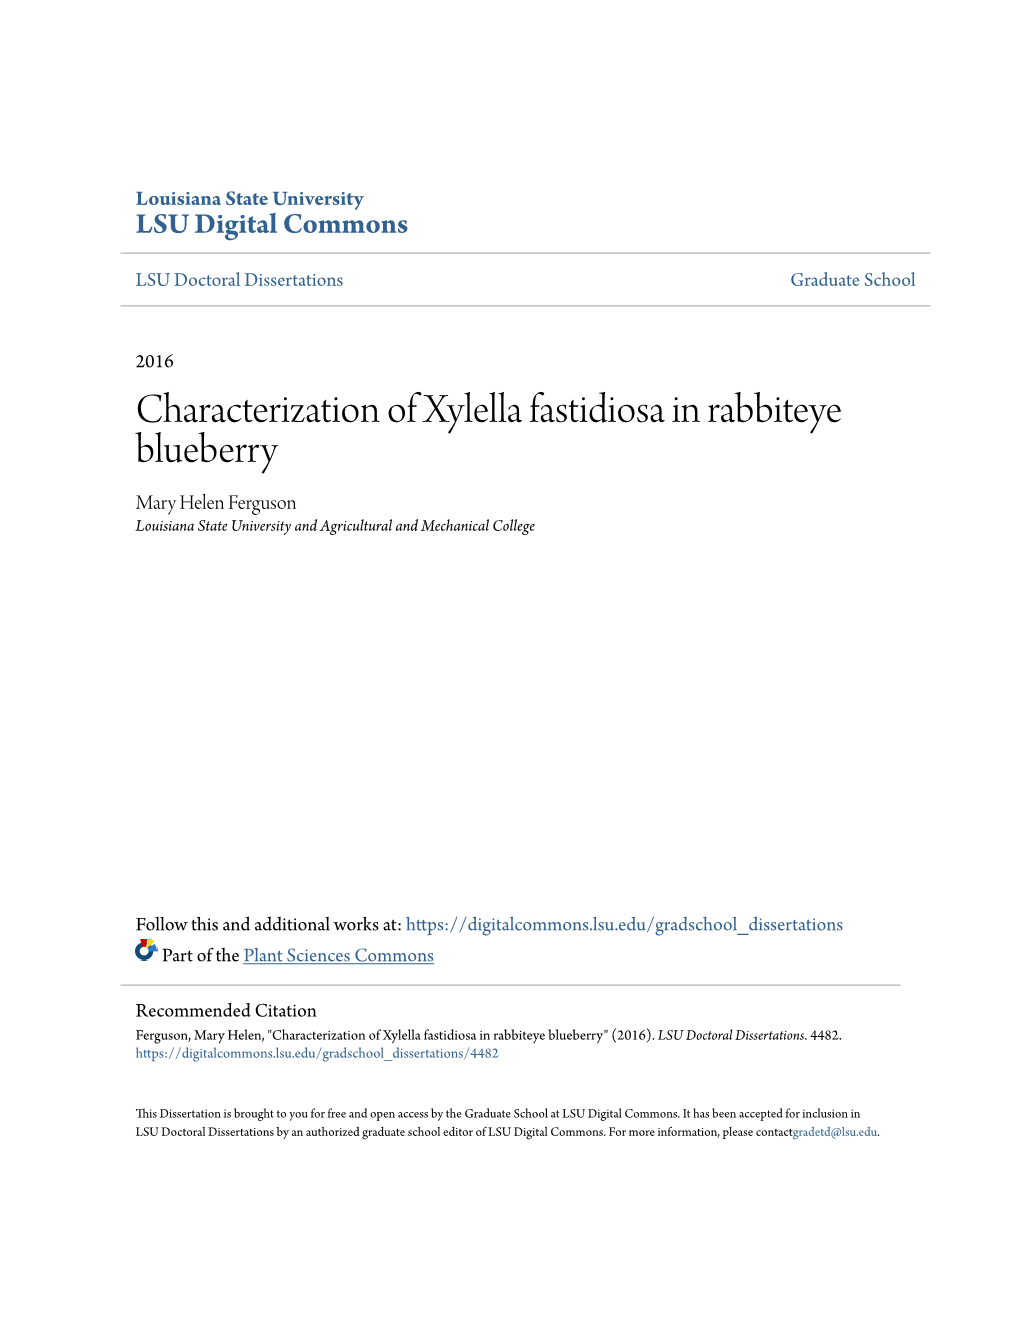 Characterization of Xylella Fastidiosa in Rabbiteye Blueberry Mary Helen Ferguson Louisiana State University and Agricultural and Mechanical College